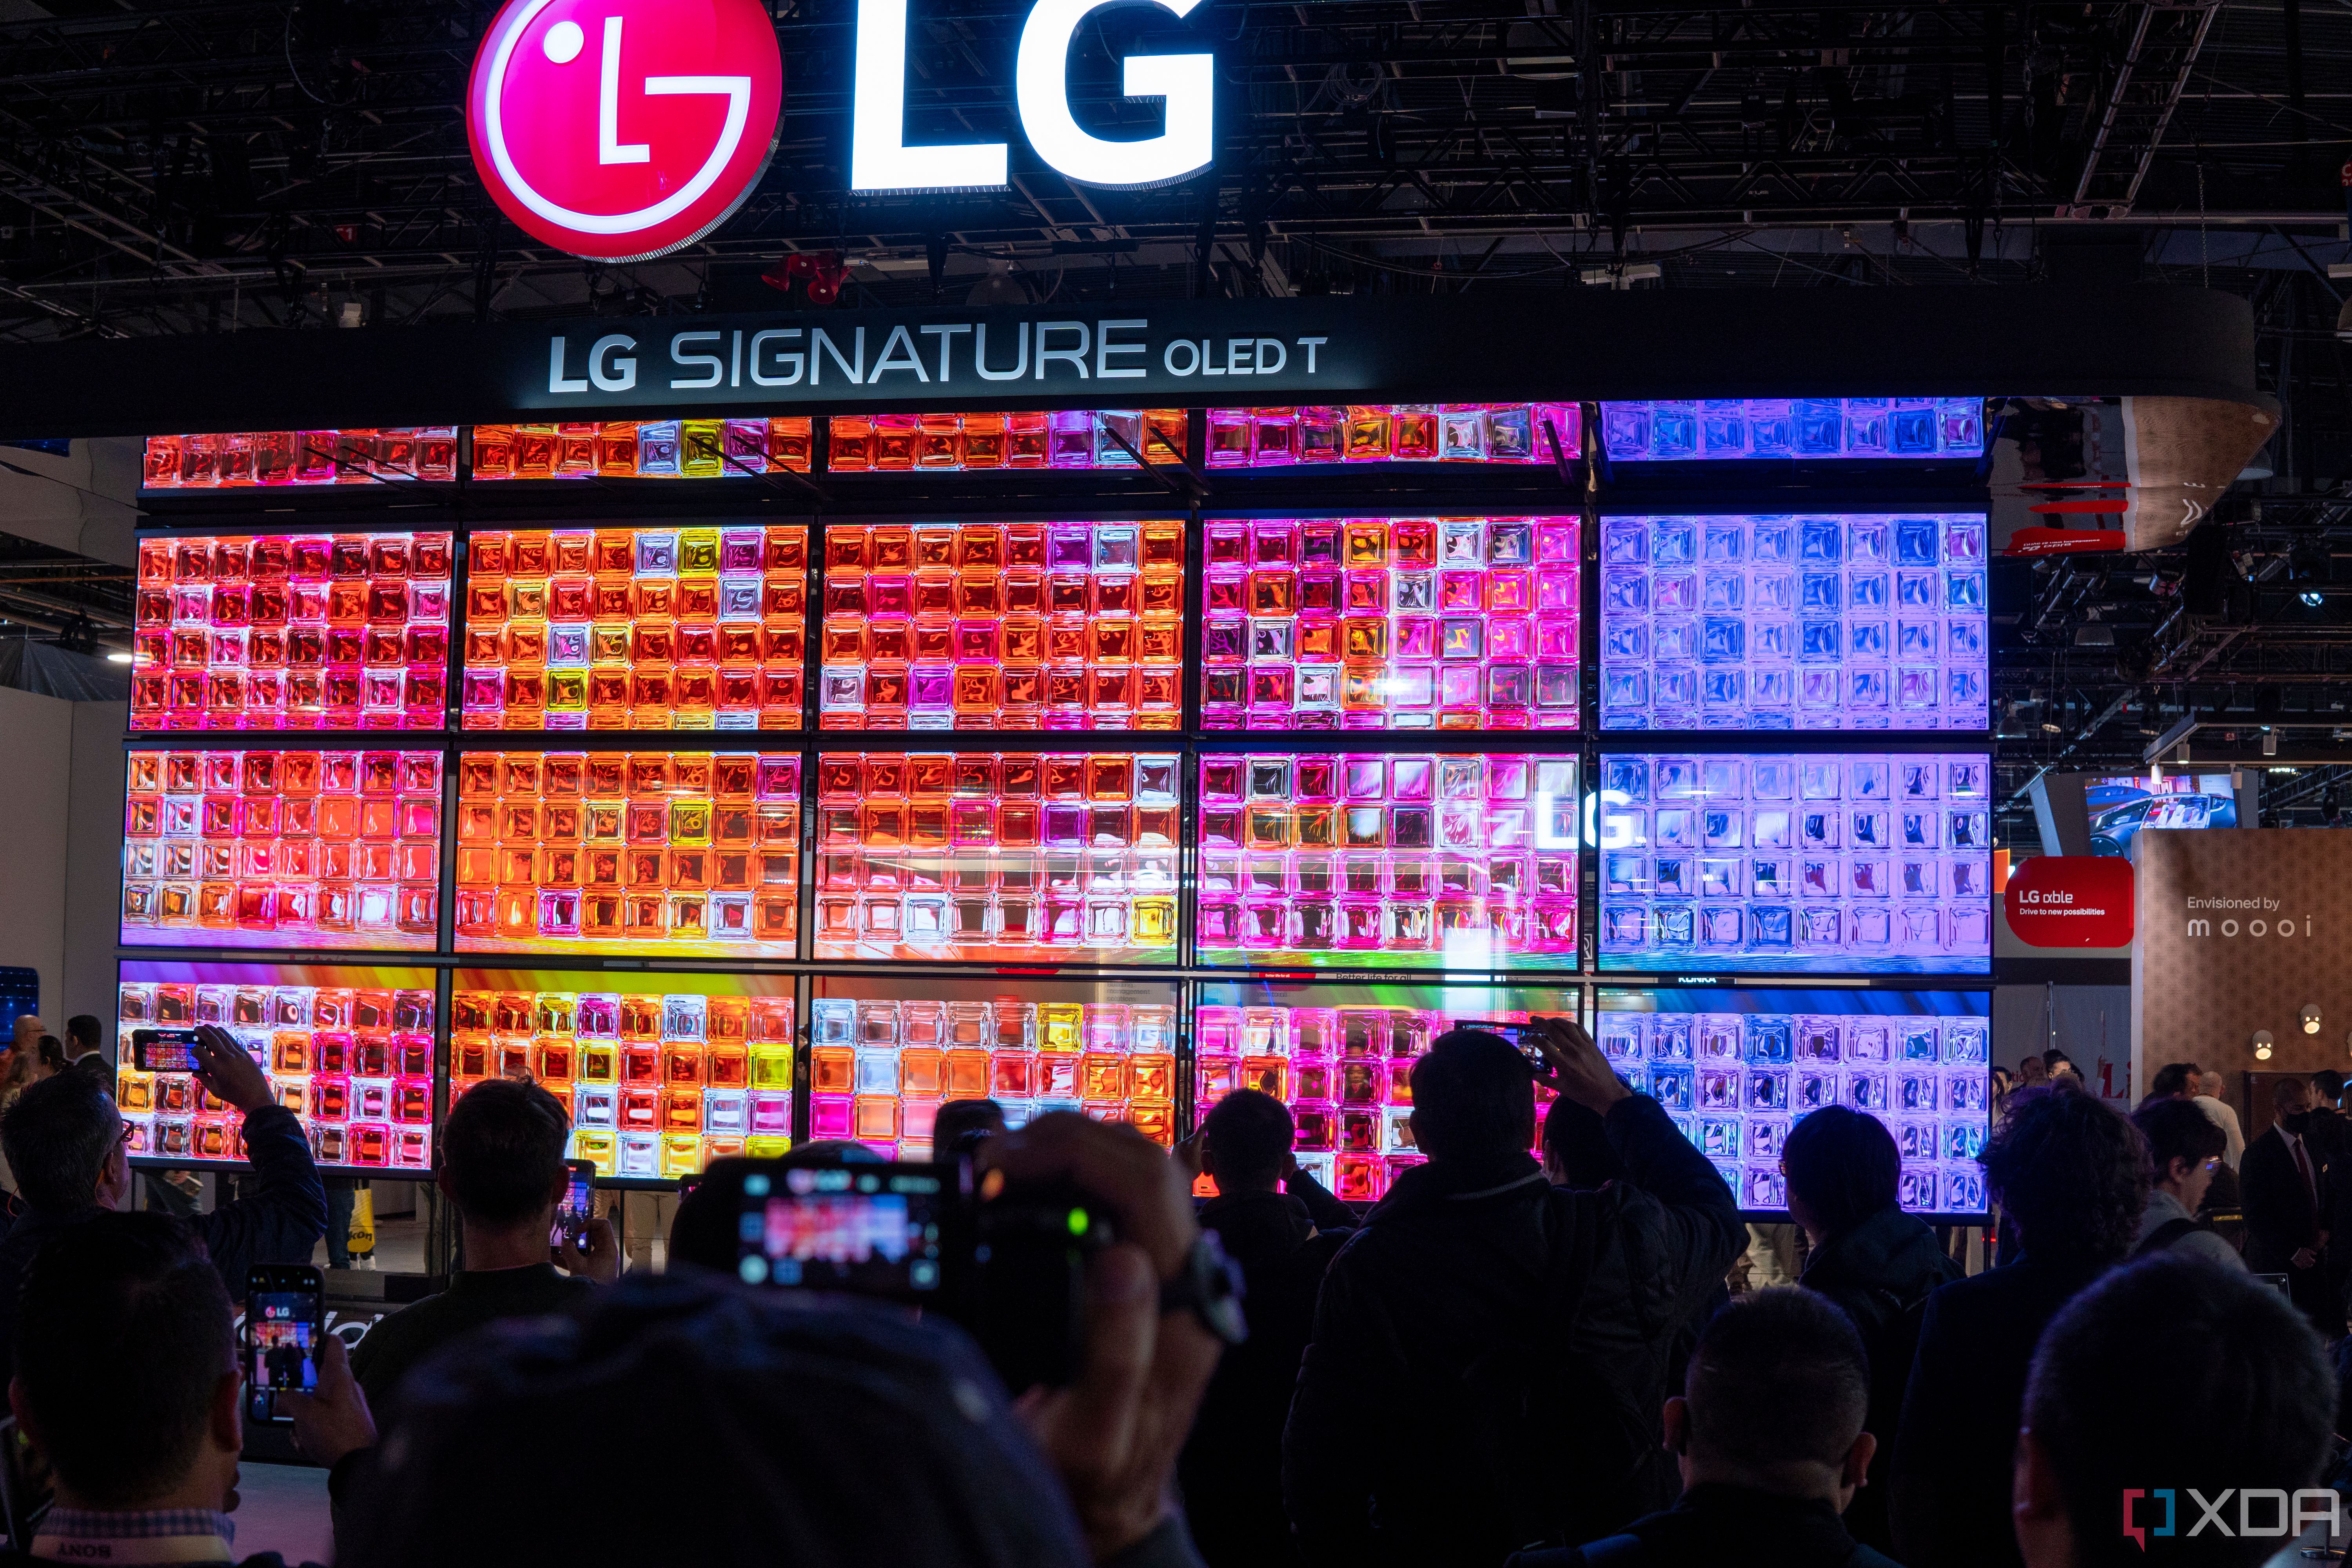 A wall of transparent OLED TVs showing colorful images